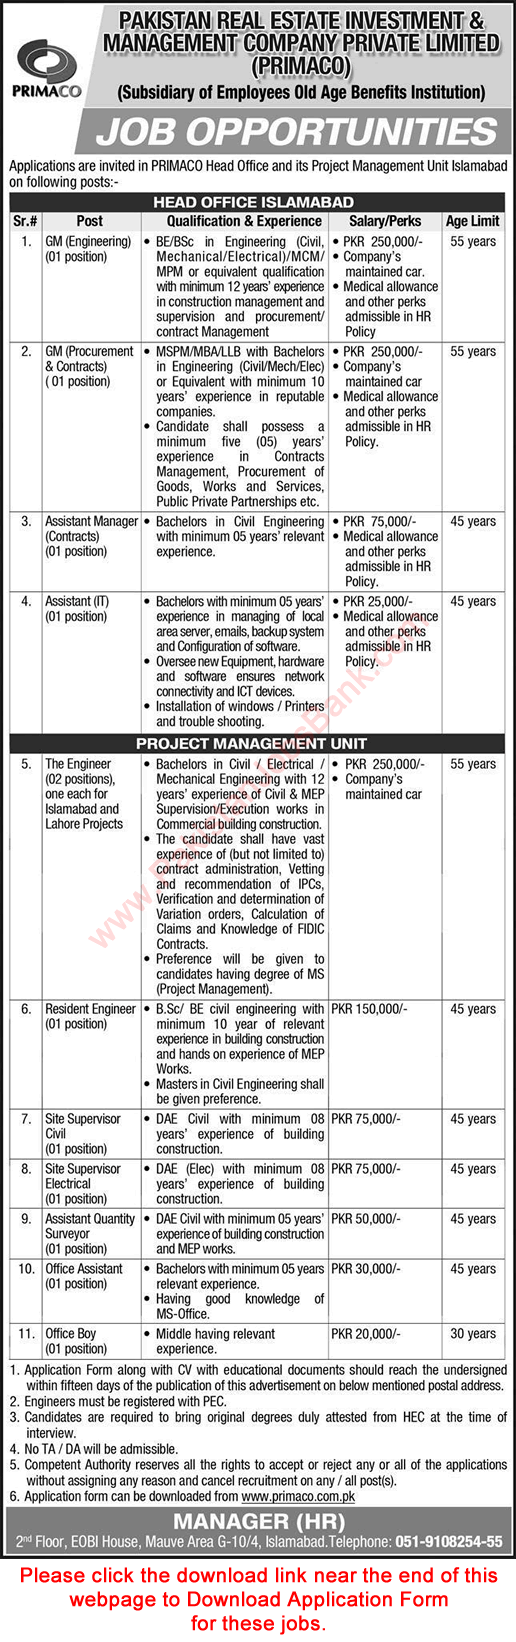 PRIMACO Jobs August 2021 Application Form Pakistan Real Estate Investment & Management Company Latest